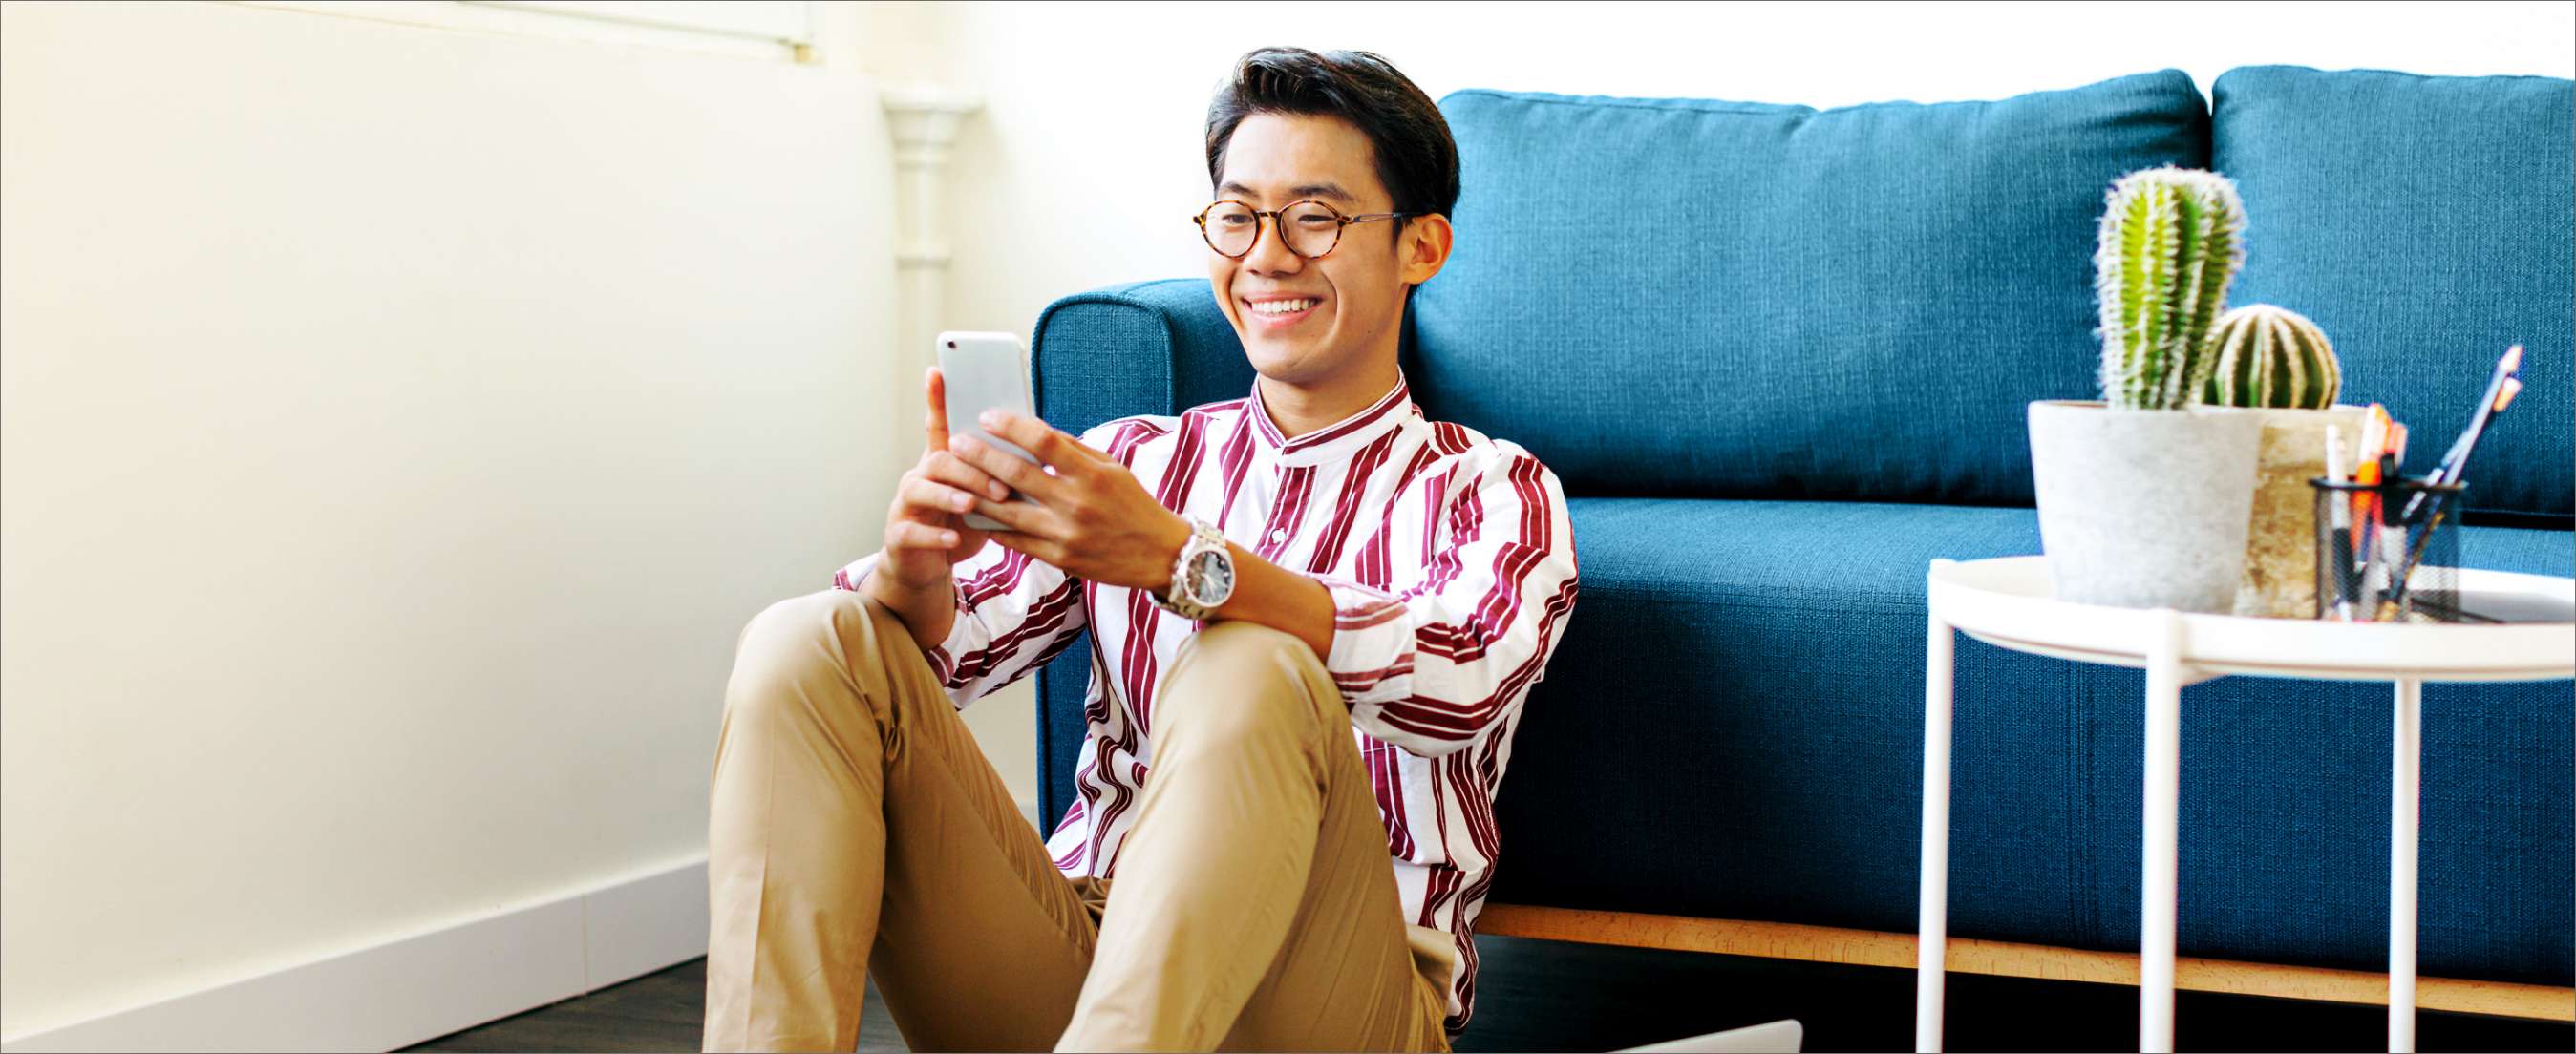 Smiling Asian man looking at smart phone while sitting on carpet against sofa at home